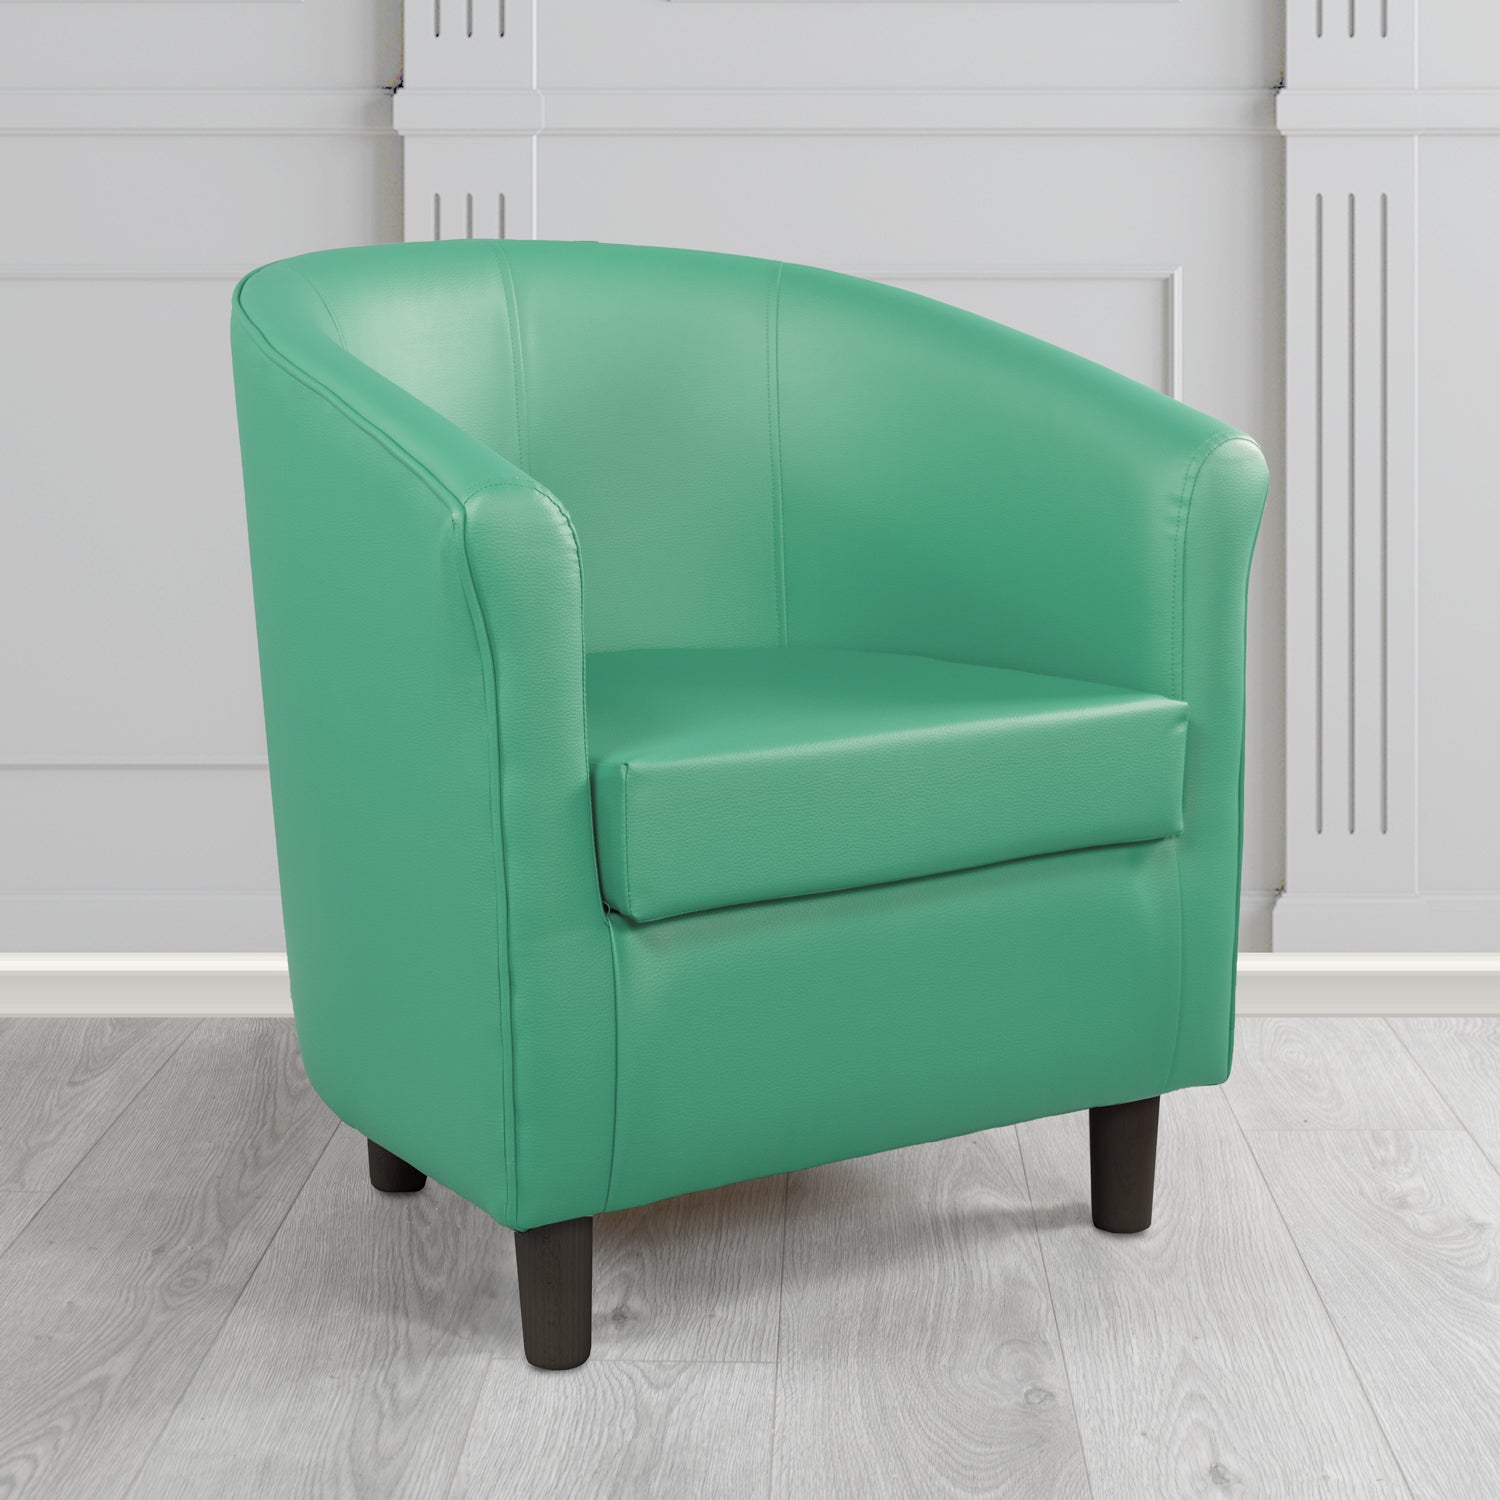 Tuscany Just Colour Applemint Antimicrobial Crib 5 Contract Faux Leather Tub Chair - The Tub Chair Shop